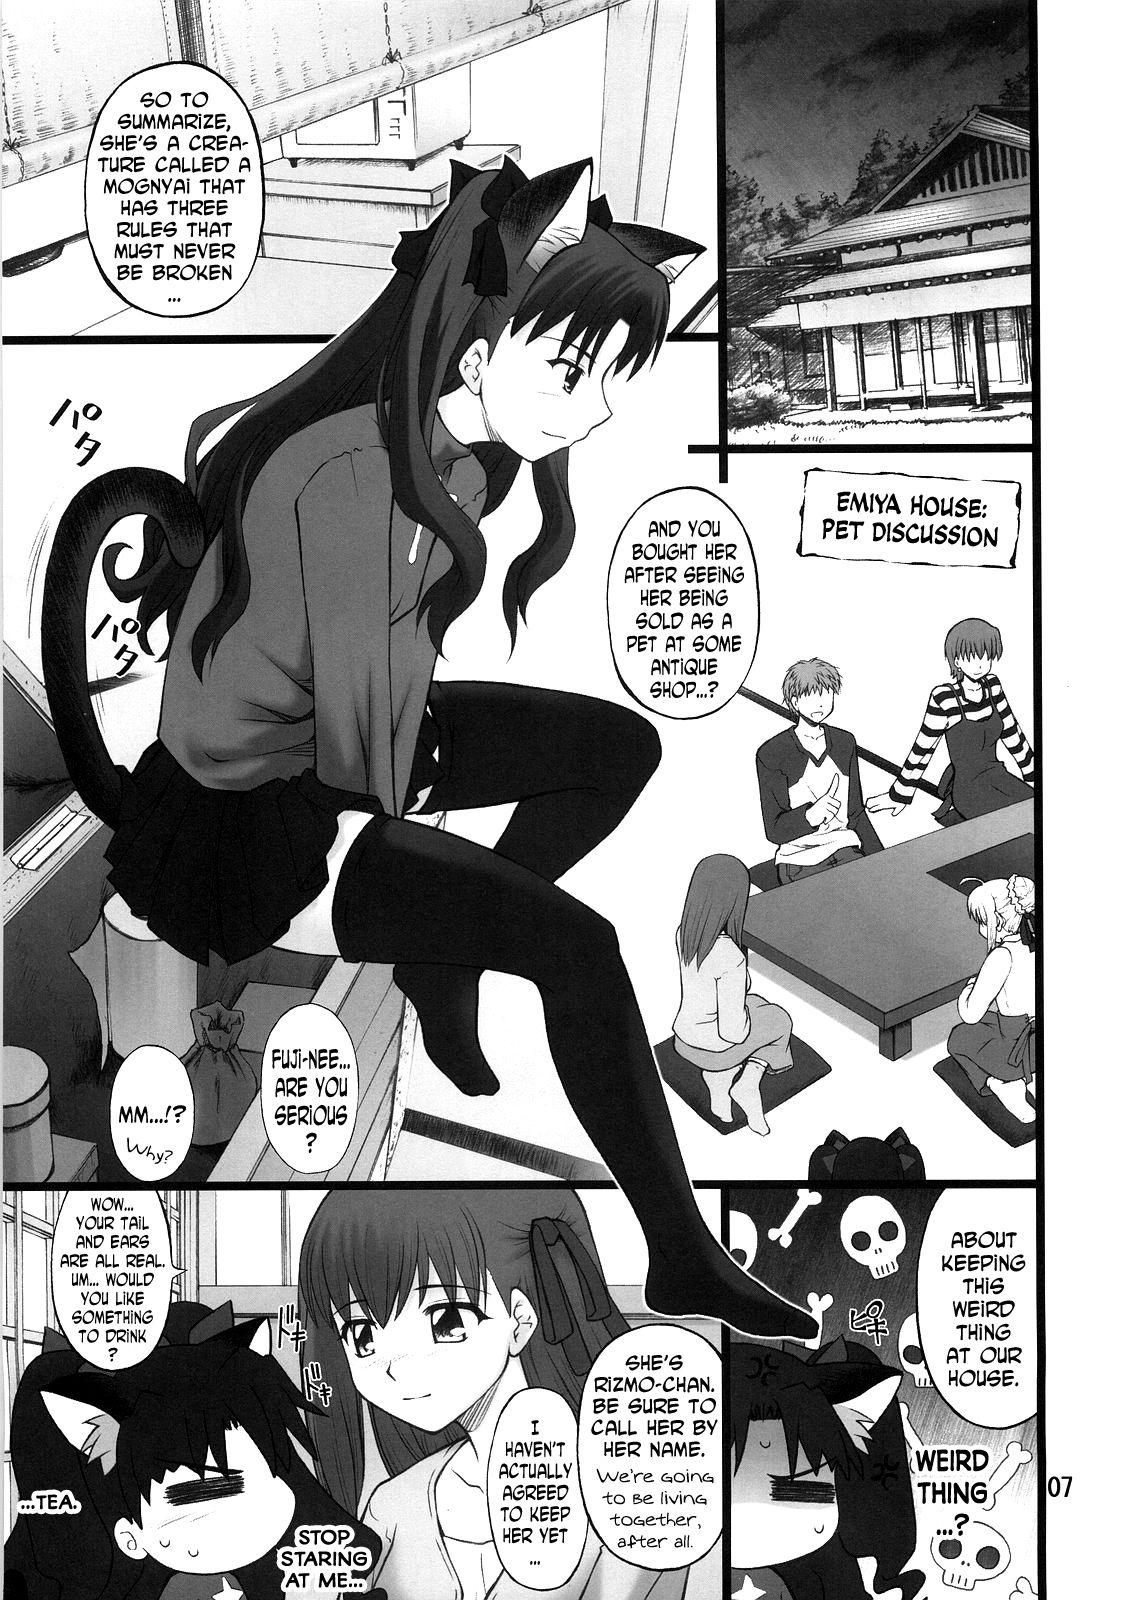 Motel Grem-Rin 1 - Fate stay night Glasses - Page 6